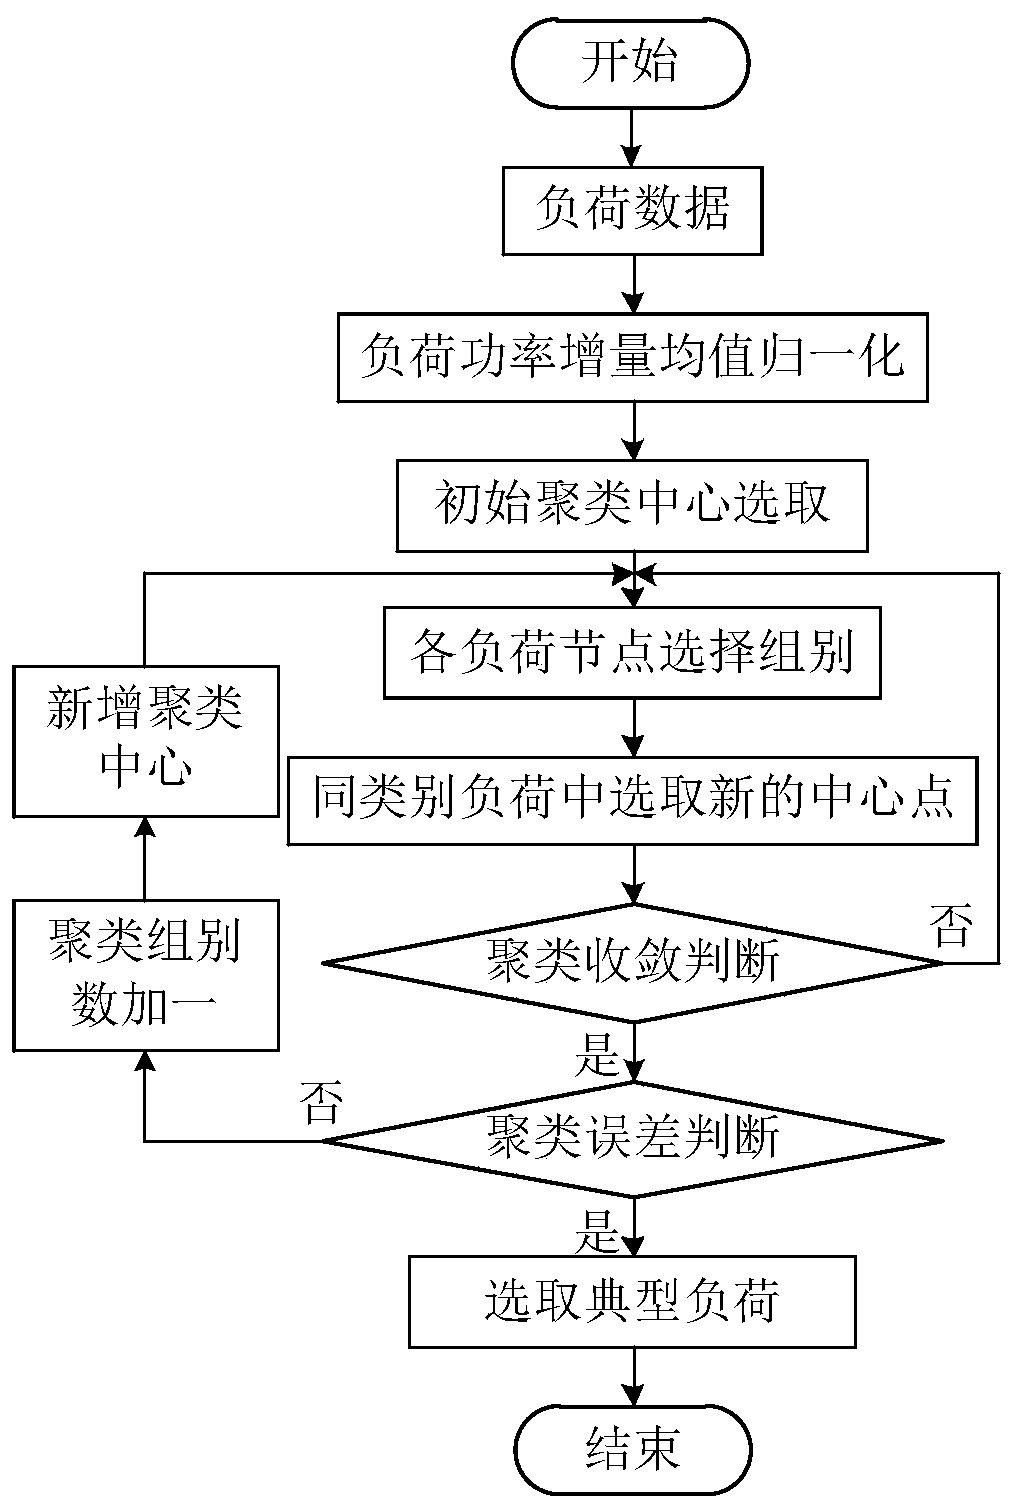 Power distribution network multi-dimensional typical scene generation method based on load clustering and network equivalence